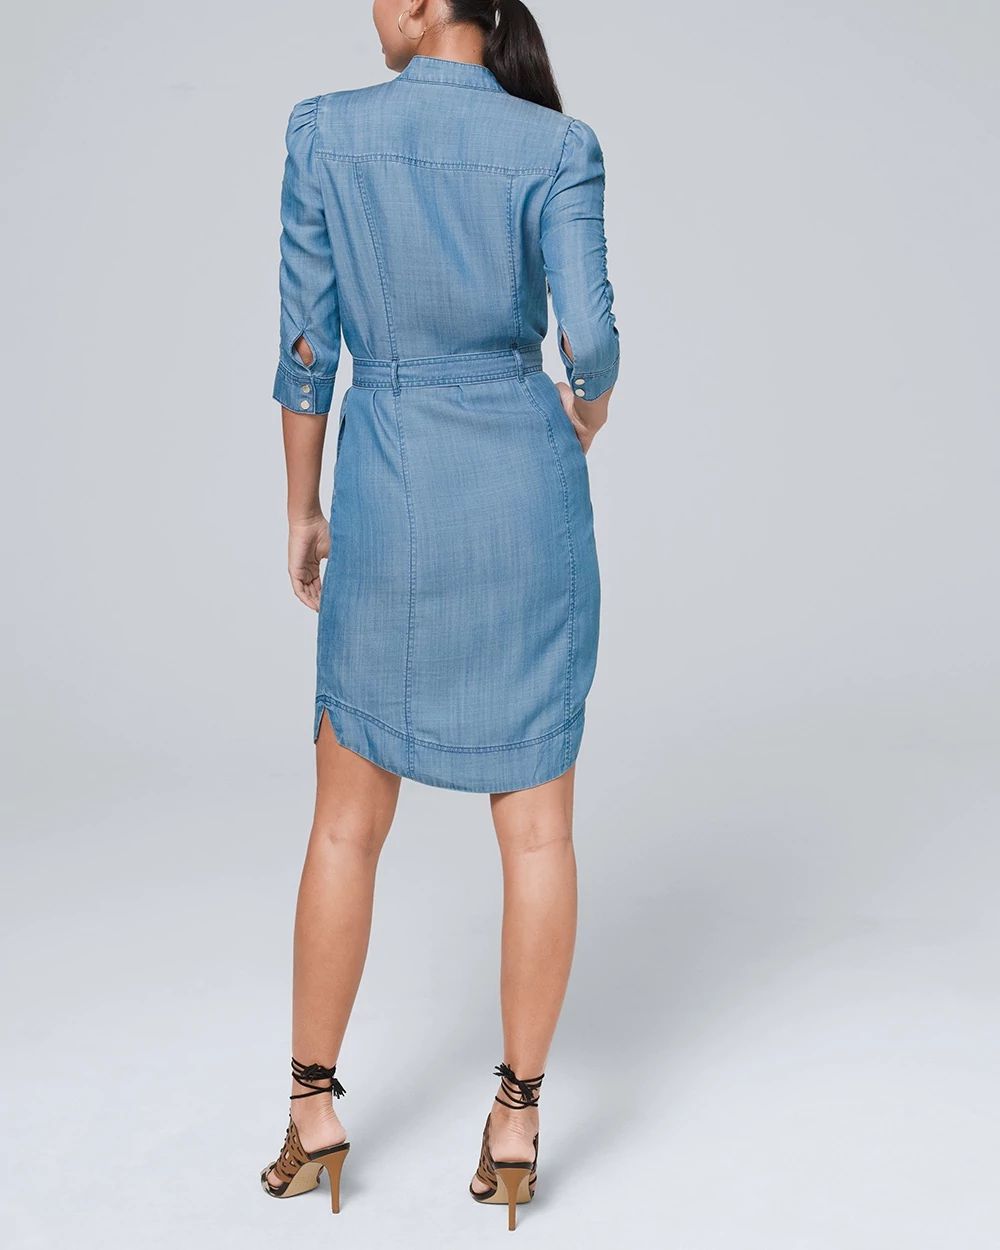 Silky-Soft Denim Shirtdress click to view larger image.